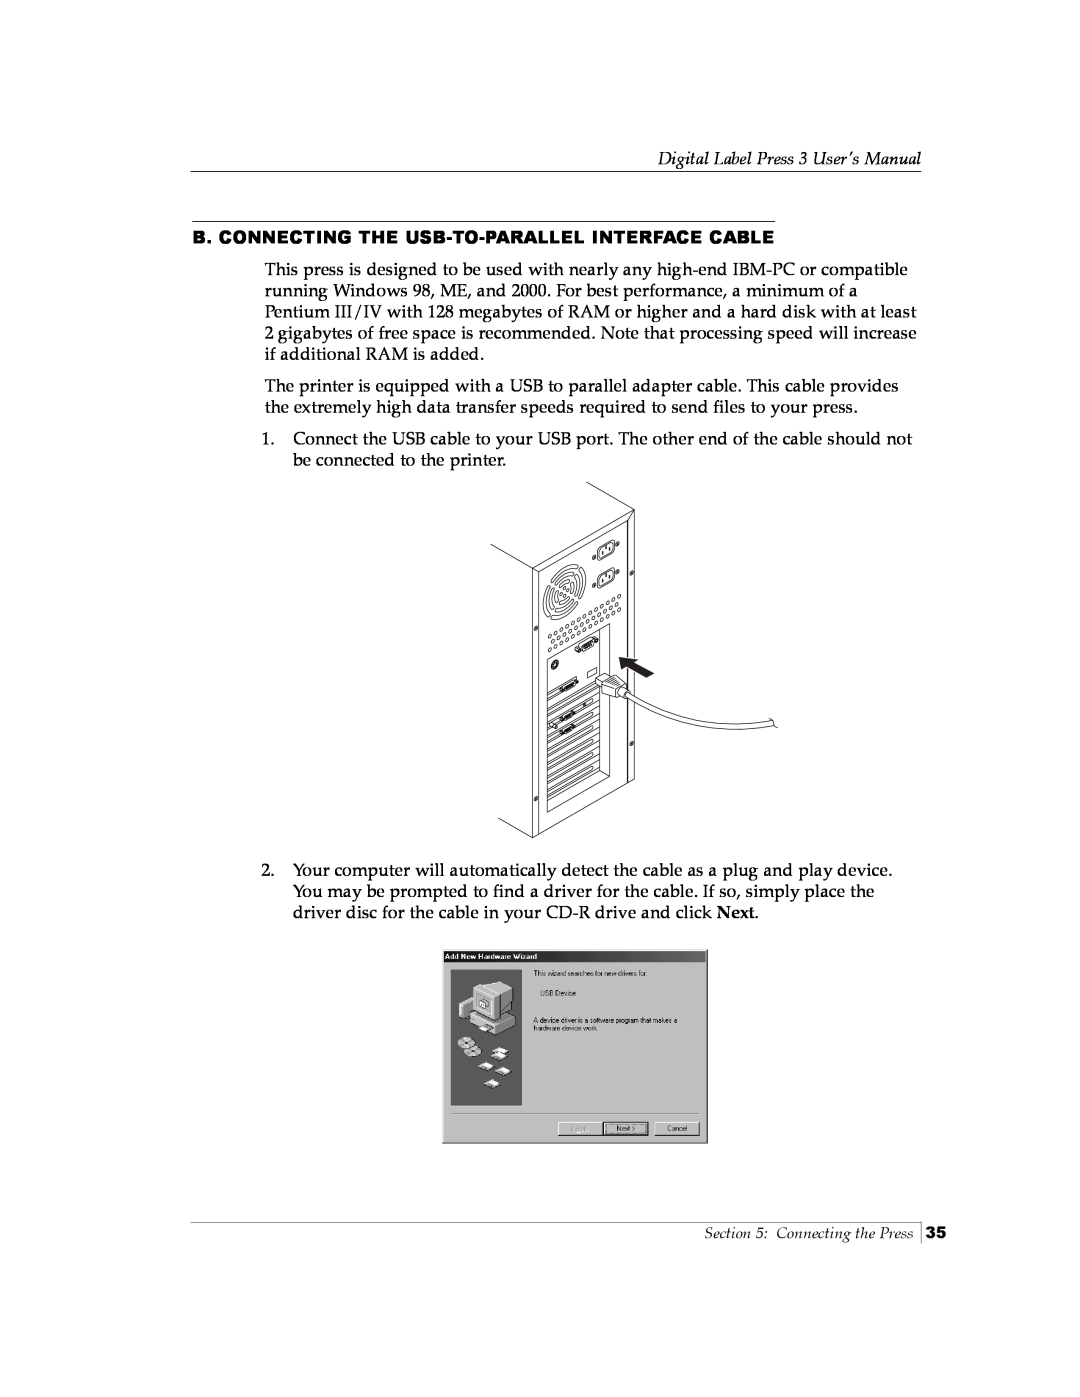 Primera Technology 510212 manual B. Connecting The Usb-To-Parallel Interface Cable, Digital Label Press 3 User’s Manual 